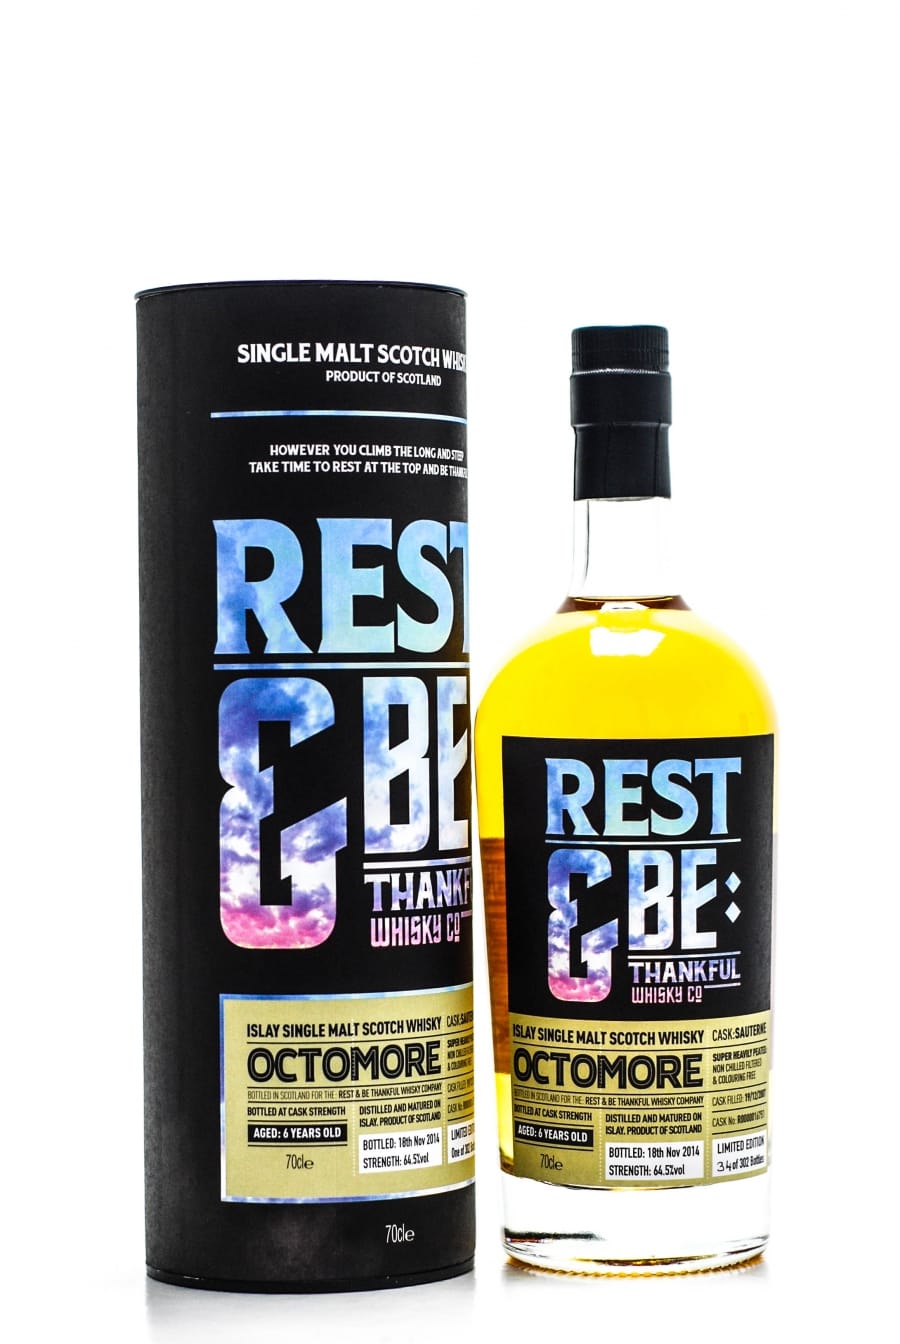 Bruichladdich - Octomore 6 Years Old Rest & be Thankful Whisky Company Cask:R0000016751 64.5% 2007